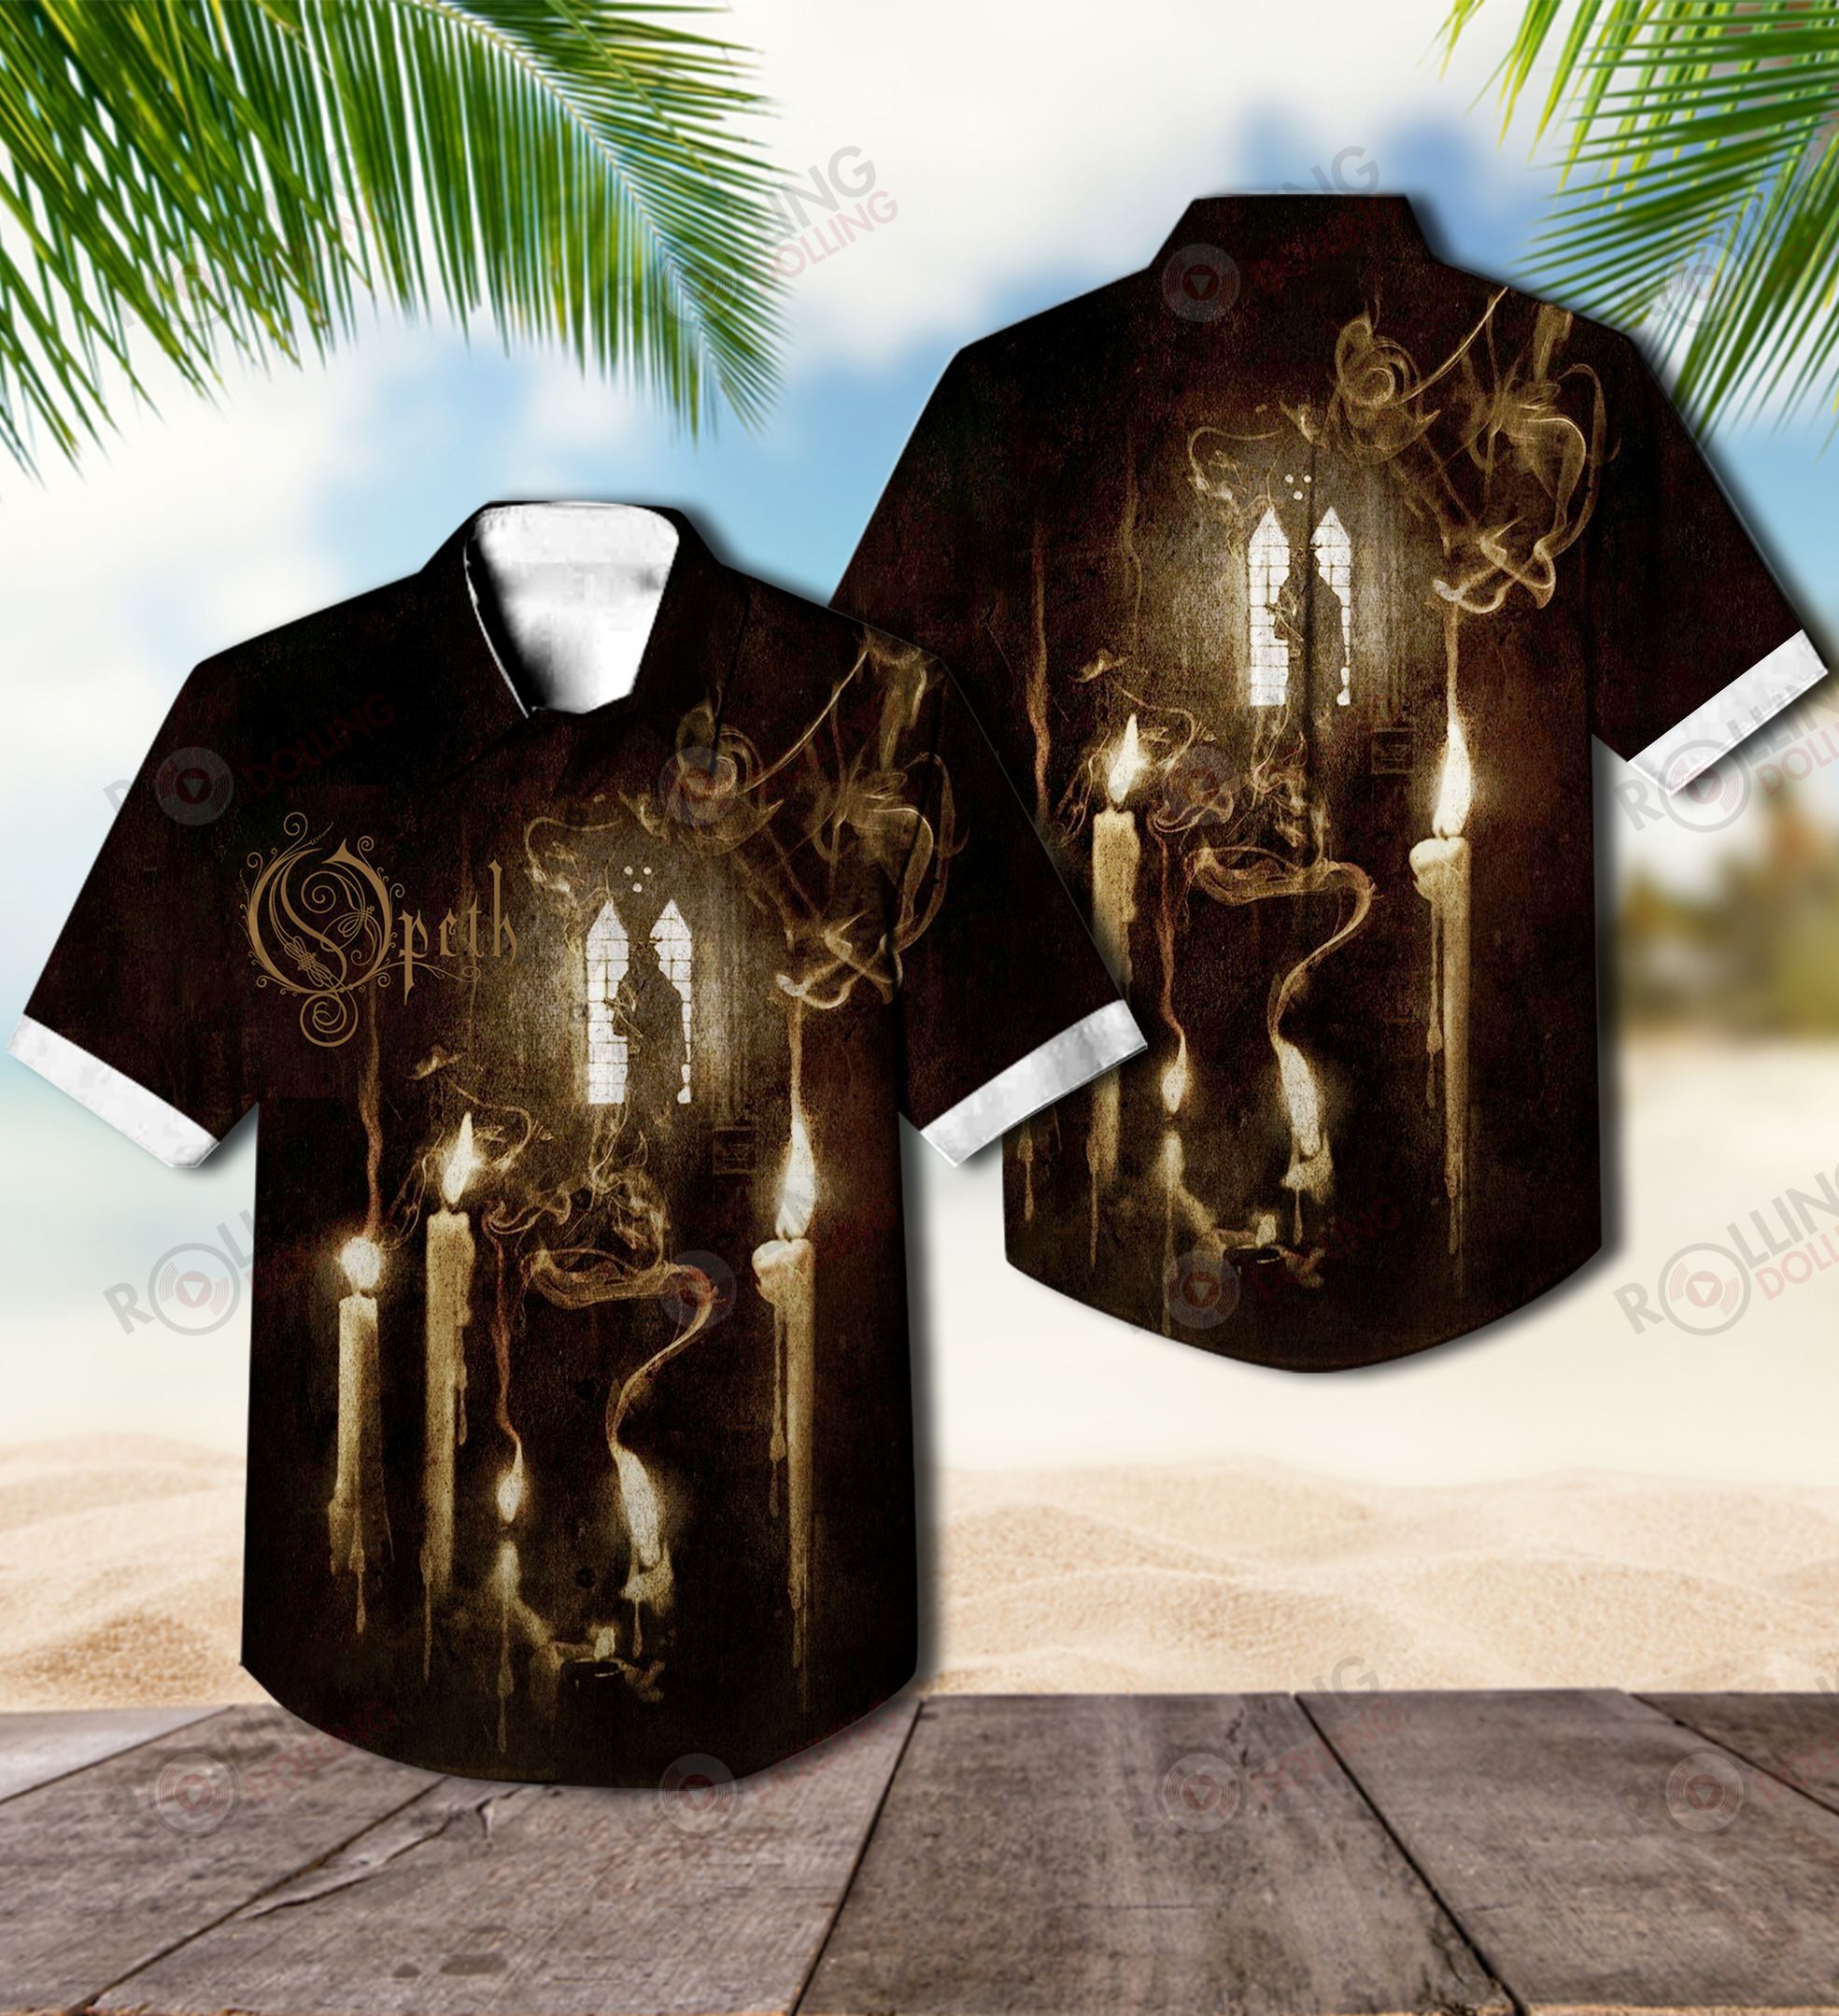 Now you can show off your love of all things band with this Hawaiian Shirt 43